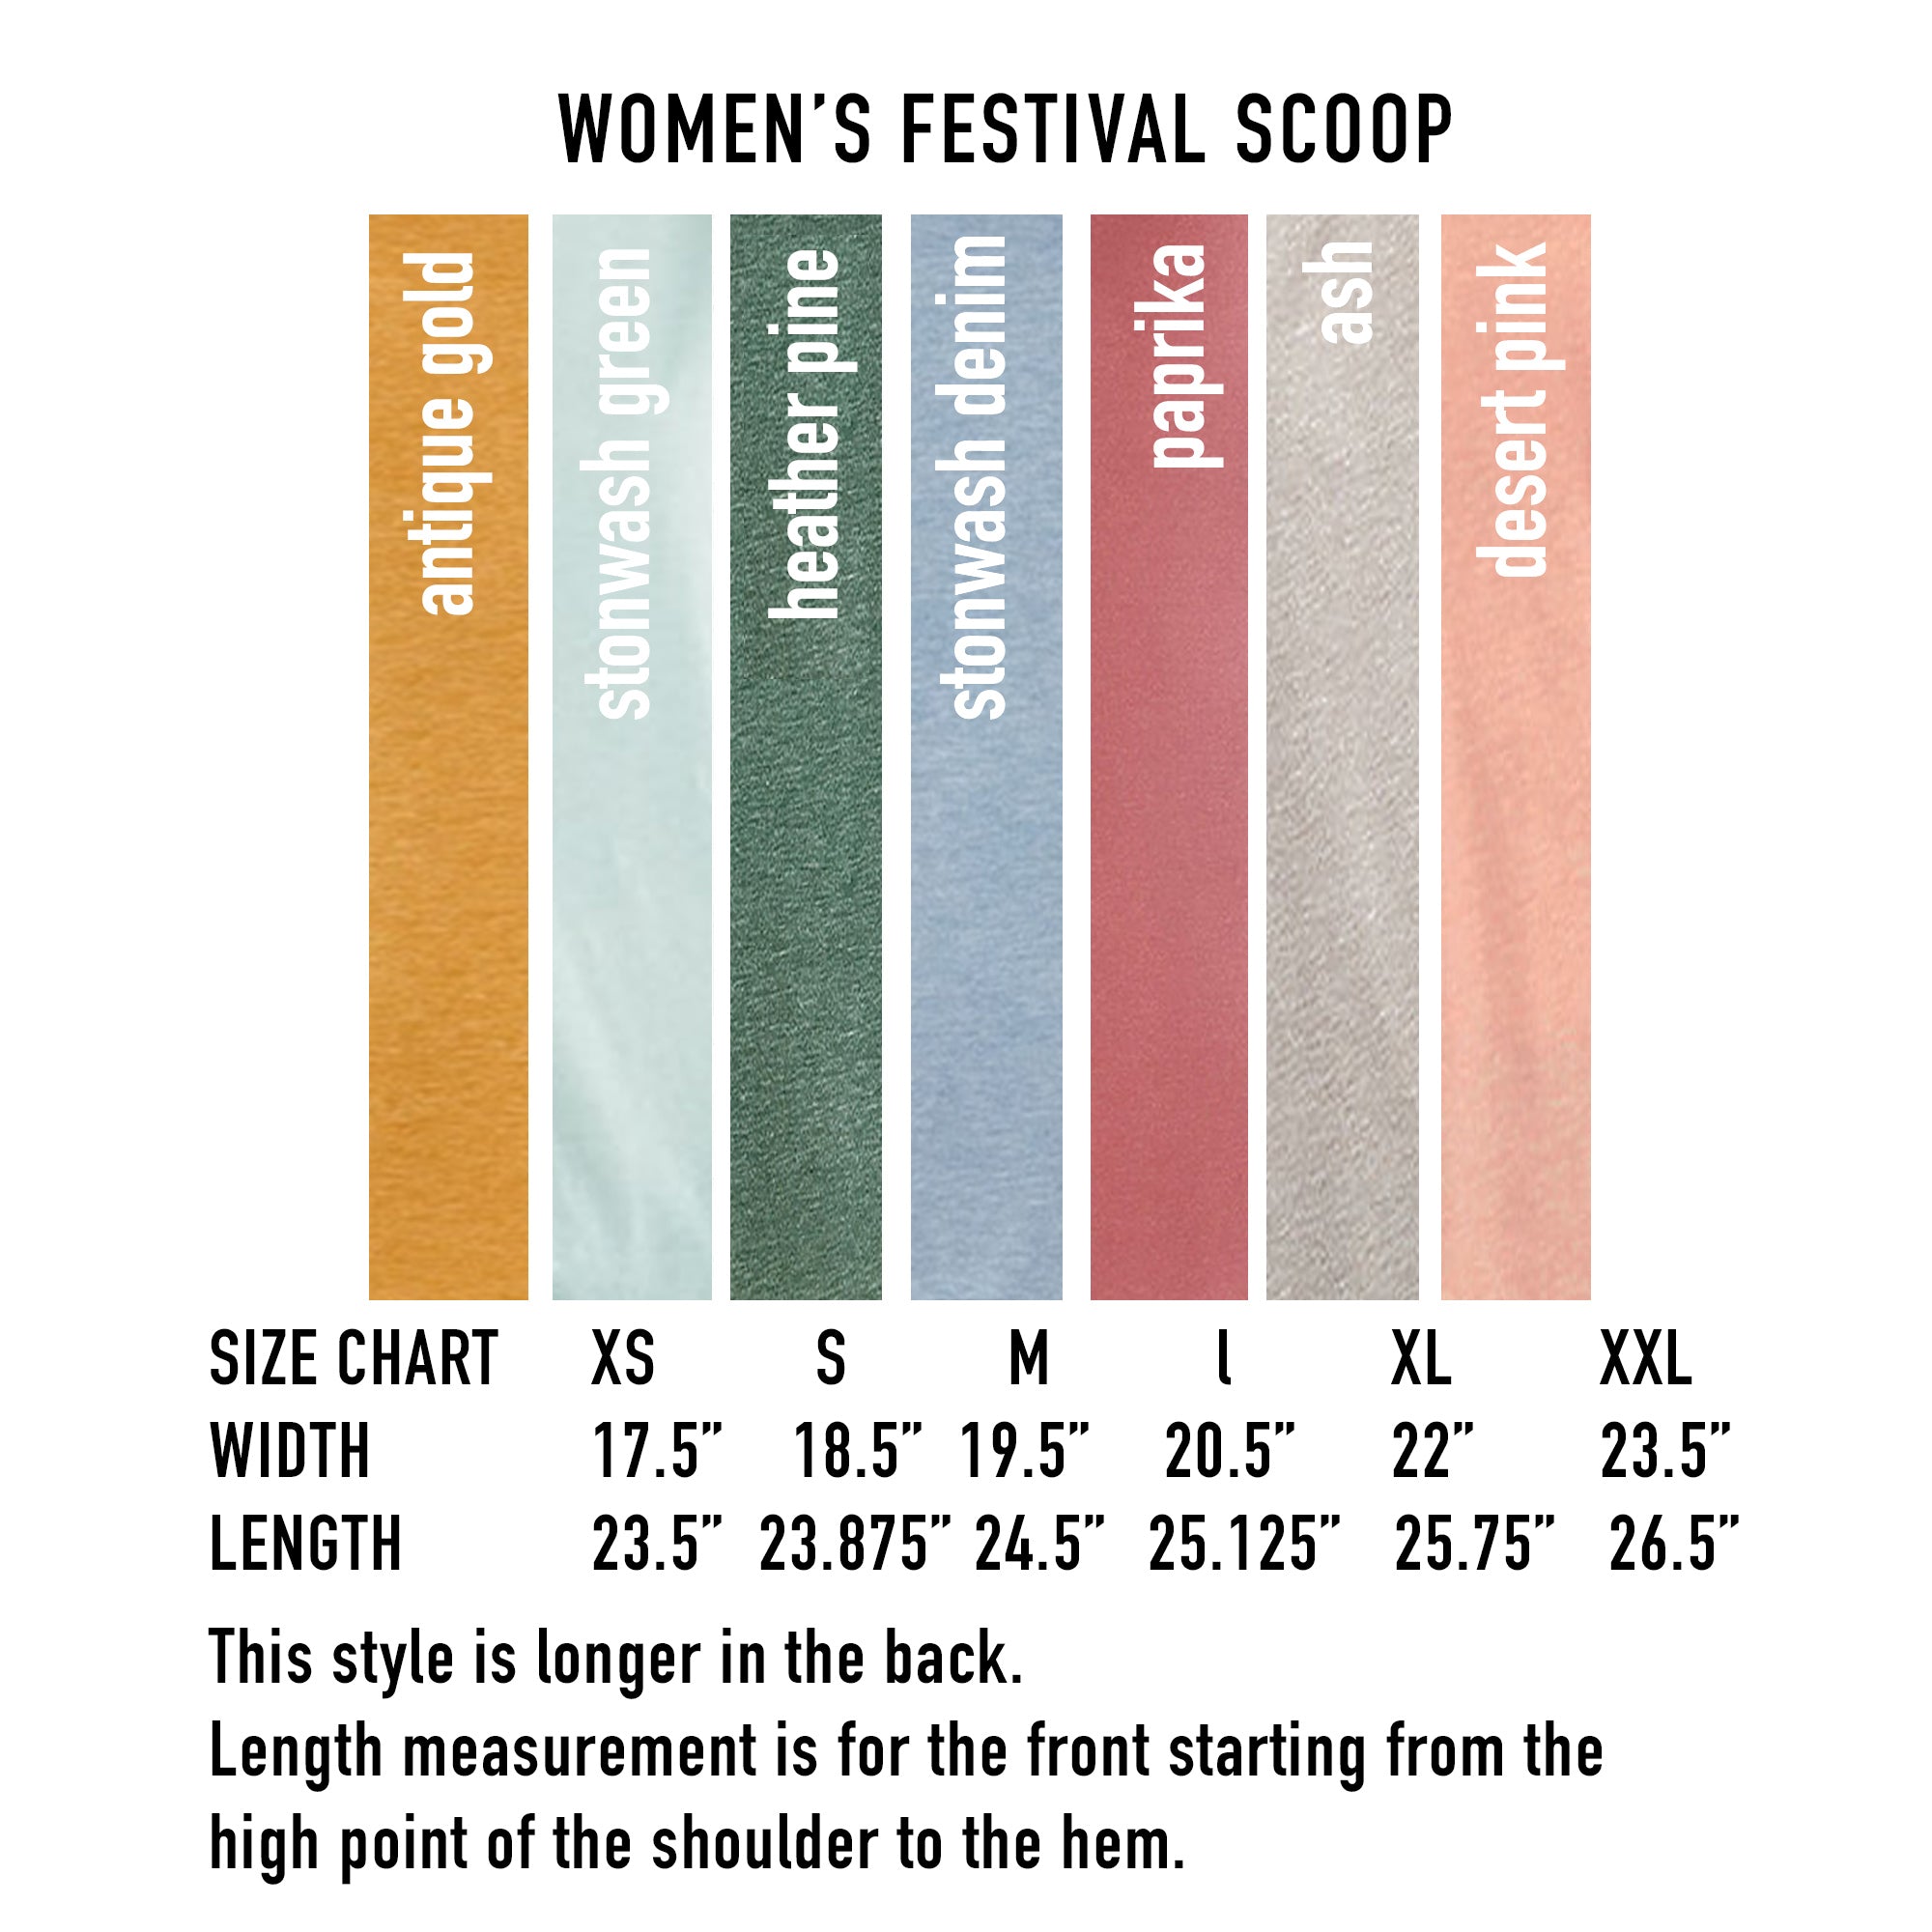 The Most Cake : Women's Festival Scoop